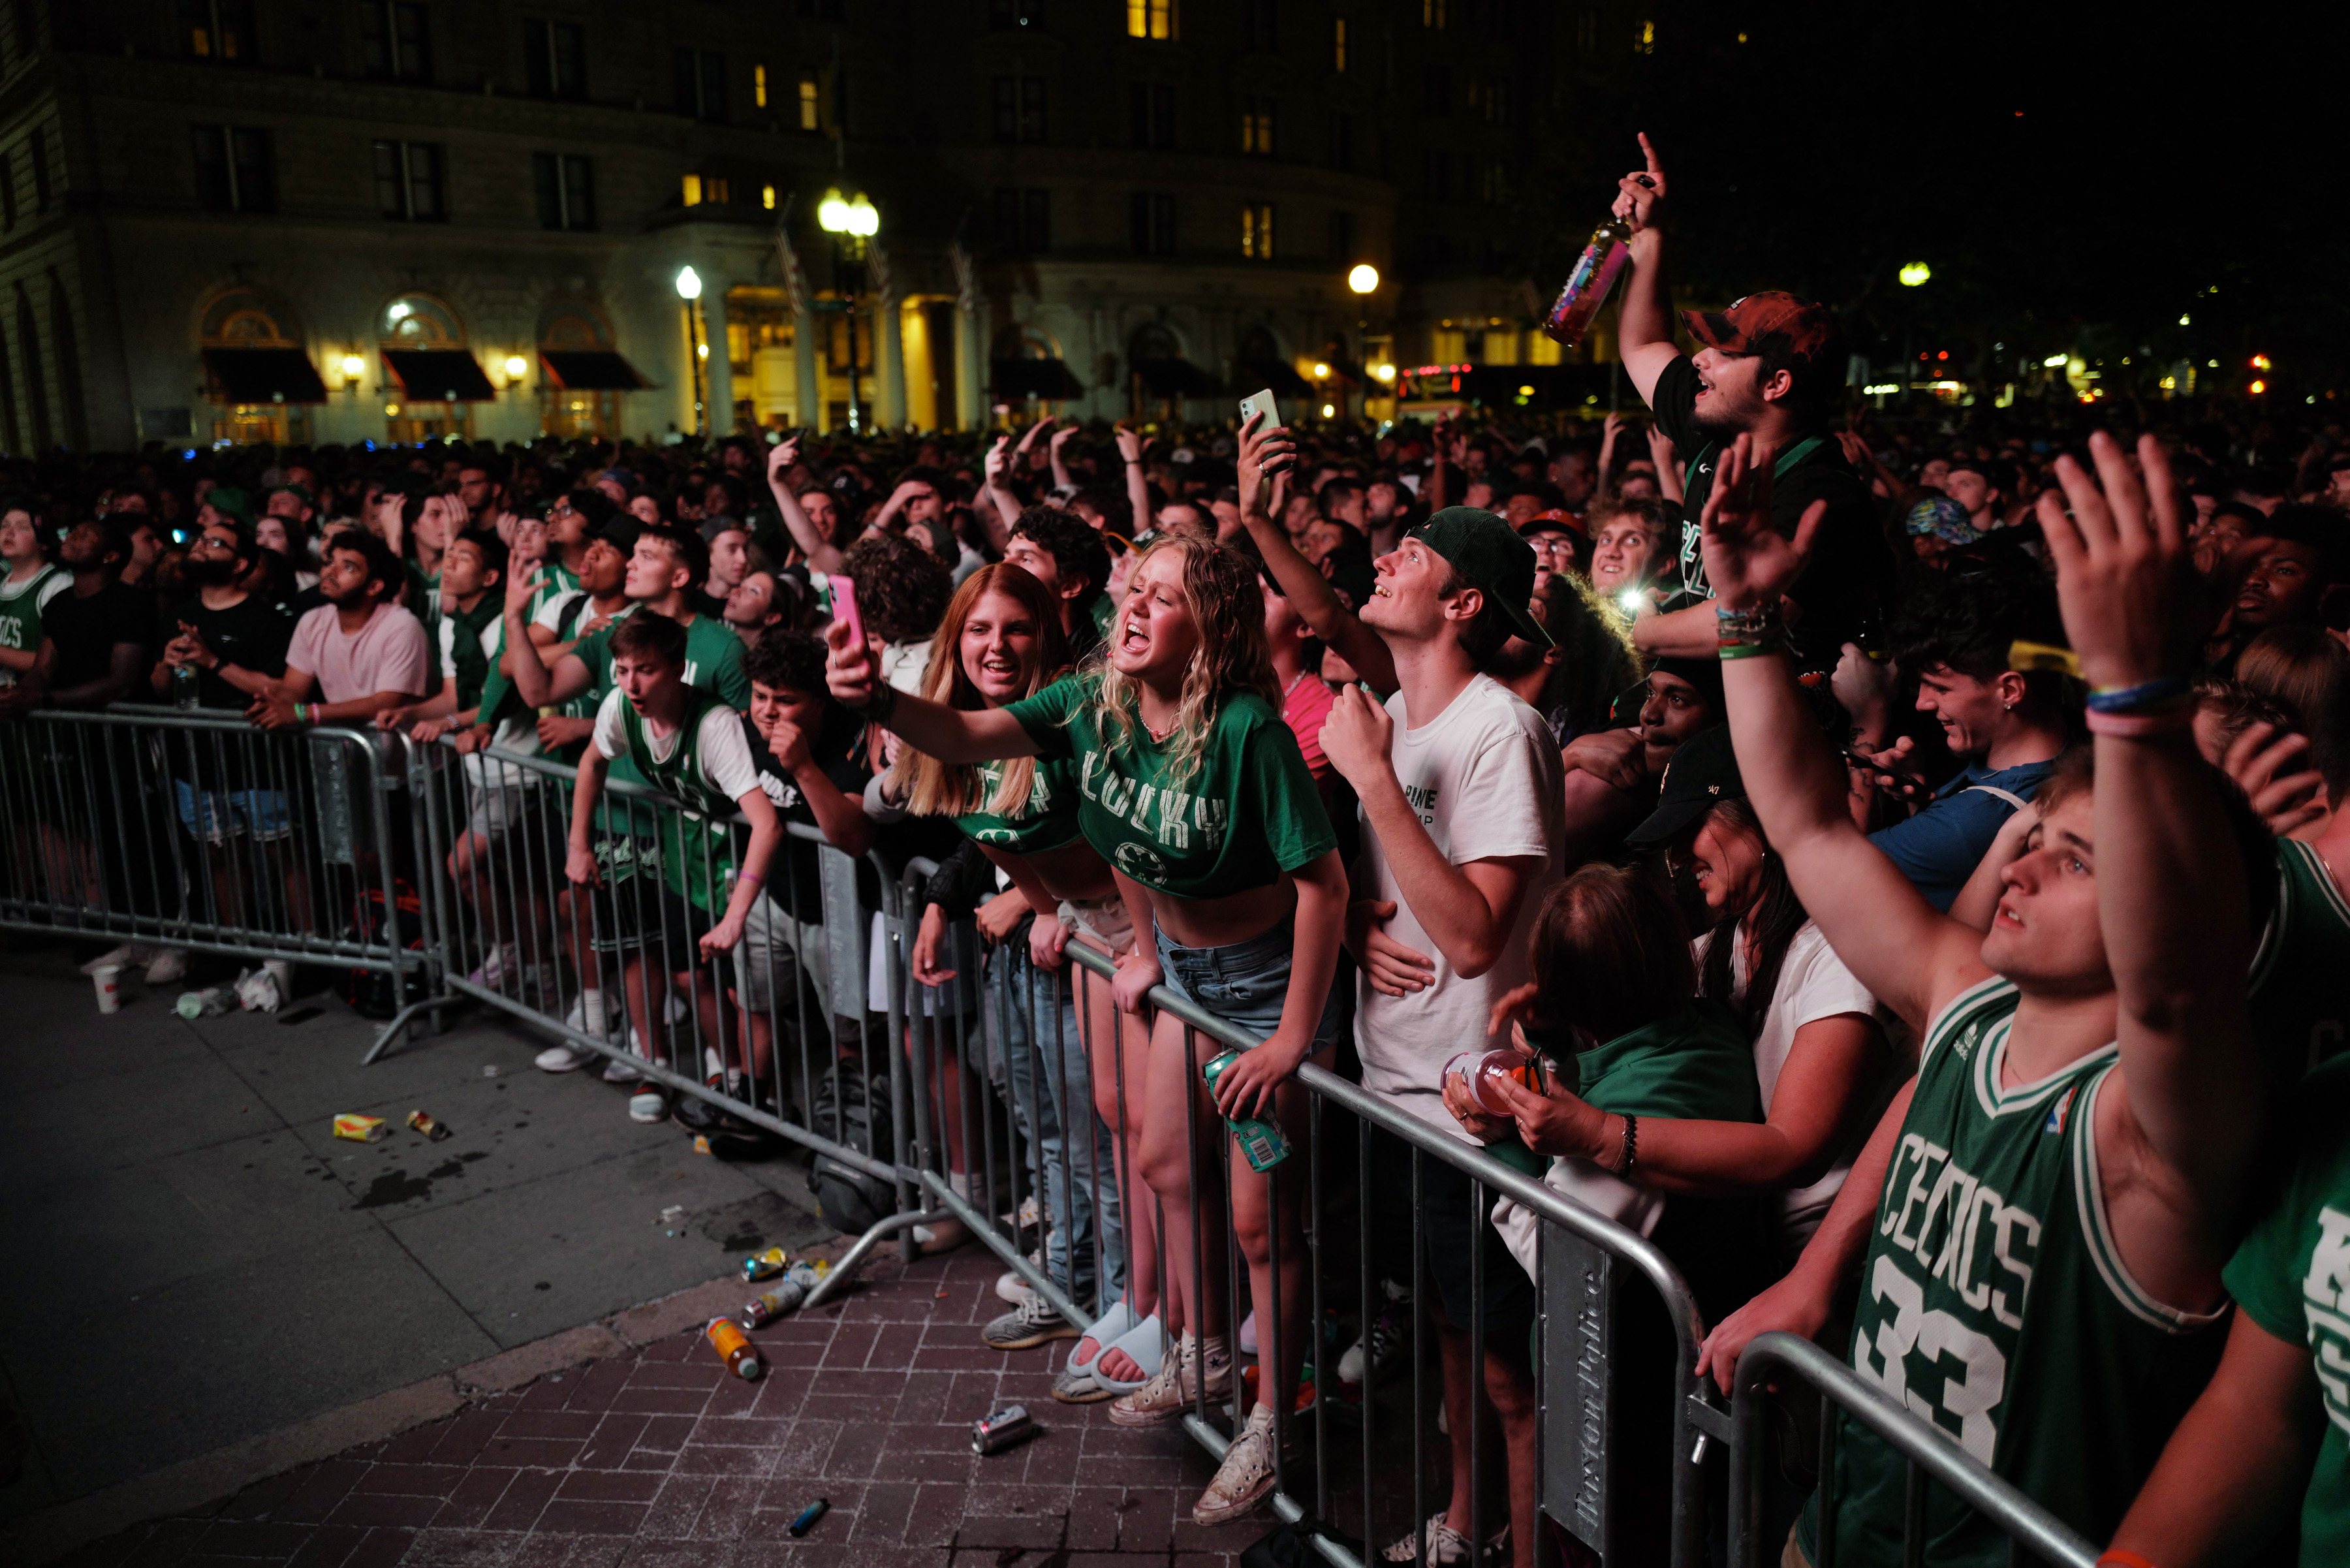 One injured in fight at Celtics watch party in Copley Square